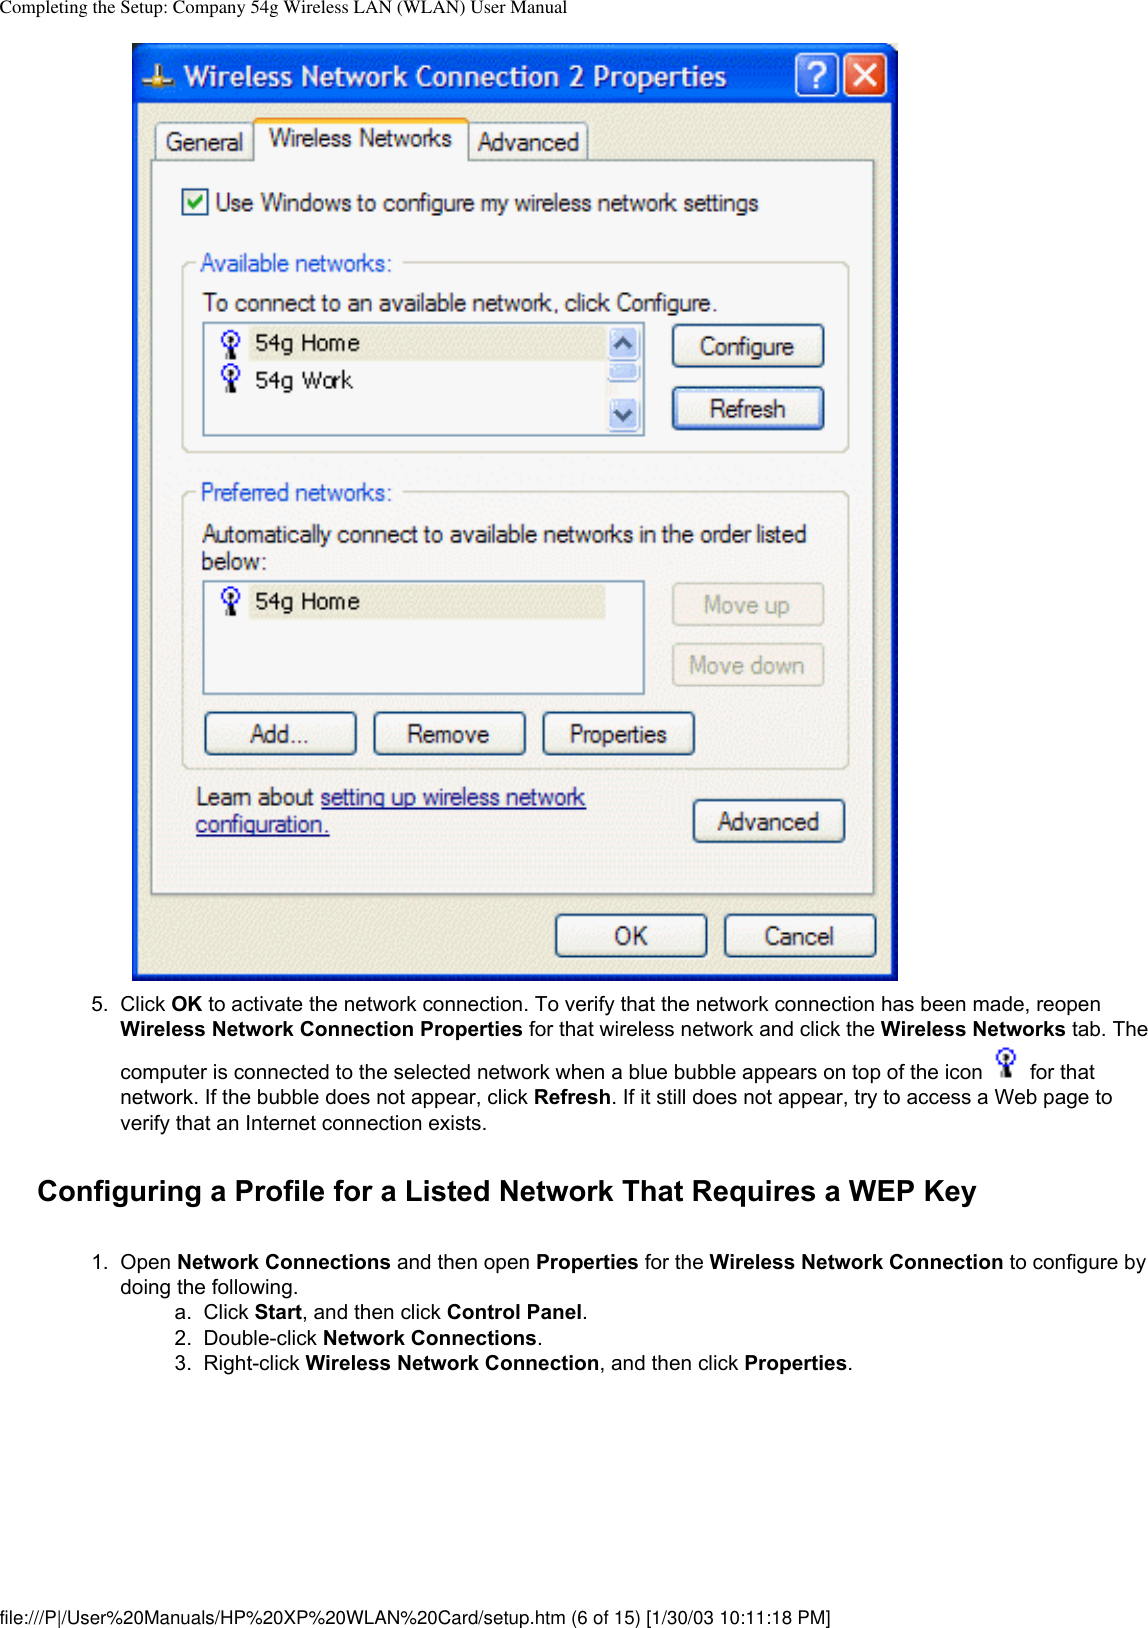 Completing the Setup: Company 54g Wireless LAN (WLAN) User Manual5.  Click OK to activate the network connection. To verify that the network connection has been made, reopen Wireless Network Connection Properties for that wireless network and click the Wireless Networks tab. The computer is connected to the selected network when a blue bubble appears on top of the icon   for that network. If the bubble does not appear, click Refresh. If it still does not appear, try to access a Web page to verify that an Internet connection exists. Configuring a Profile for a Listed Network That Requires a WEP Key1.  Open Network Connections and then open Properties for the Wireless Network Connection to configure by doing the following. a.  Click Start, and then click Control Panel.2.  Double-click Network Connections.3.  Right-click Wireless Network Connection, and then click Properties. file:///P|/User%20Manuals/HP%20XP%20WLAN%20Card/setup.htm (6 of 15) [1/30/03 10:11:18 PM]